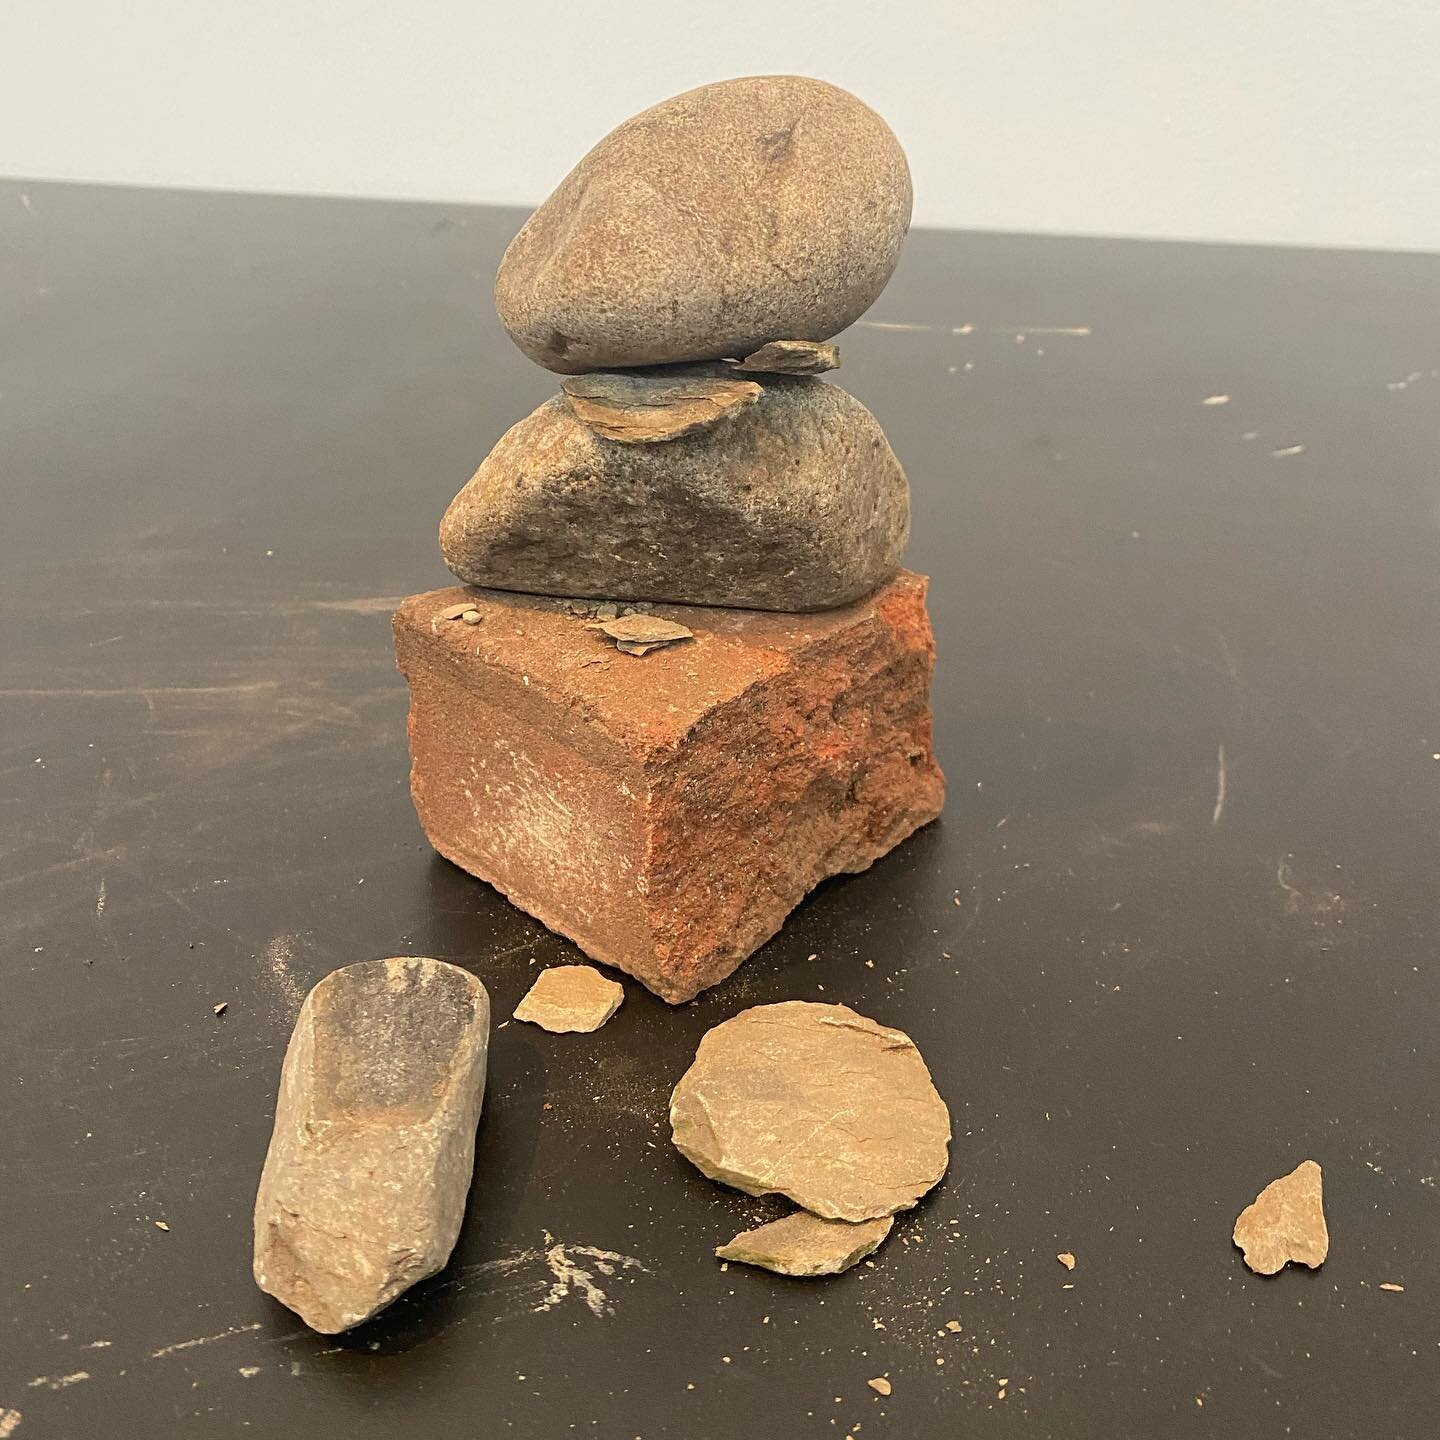 Among our activities today at Yale School of Art was leading students in a performance of Pauline Oliveros ROCK PIECE as evidenced by several stacks of rocks left around the performance space